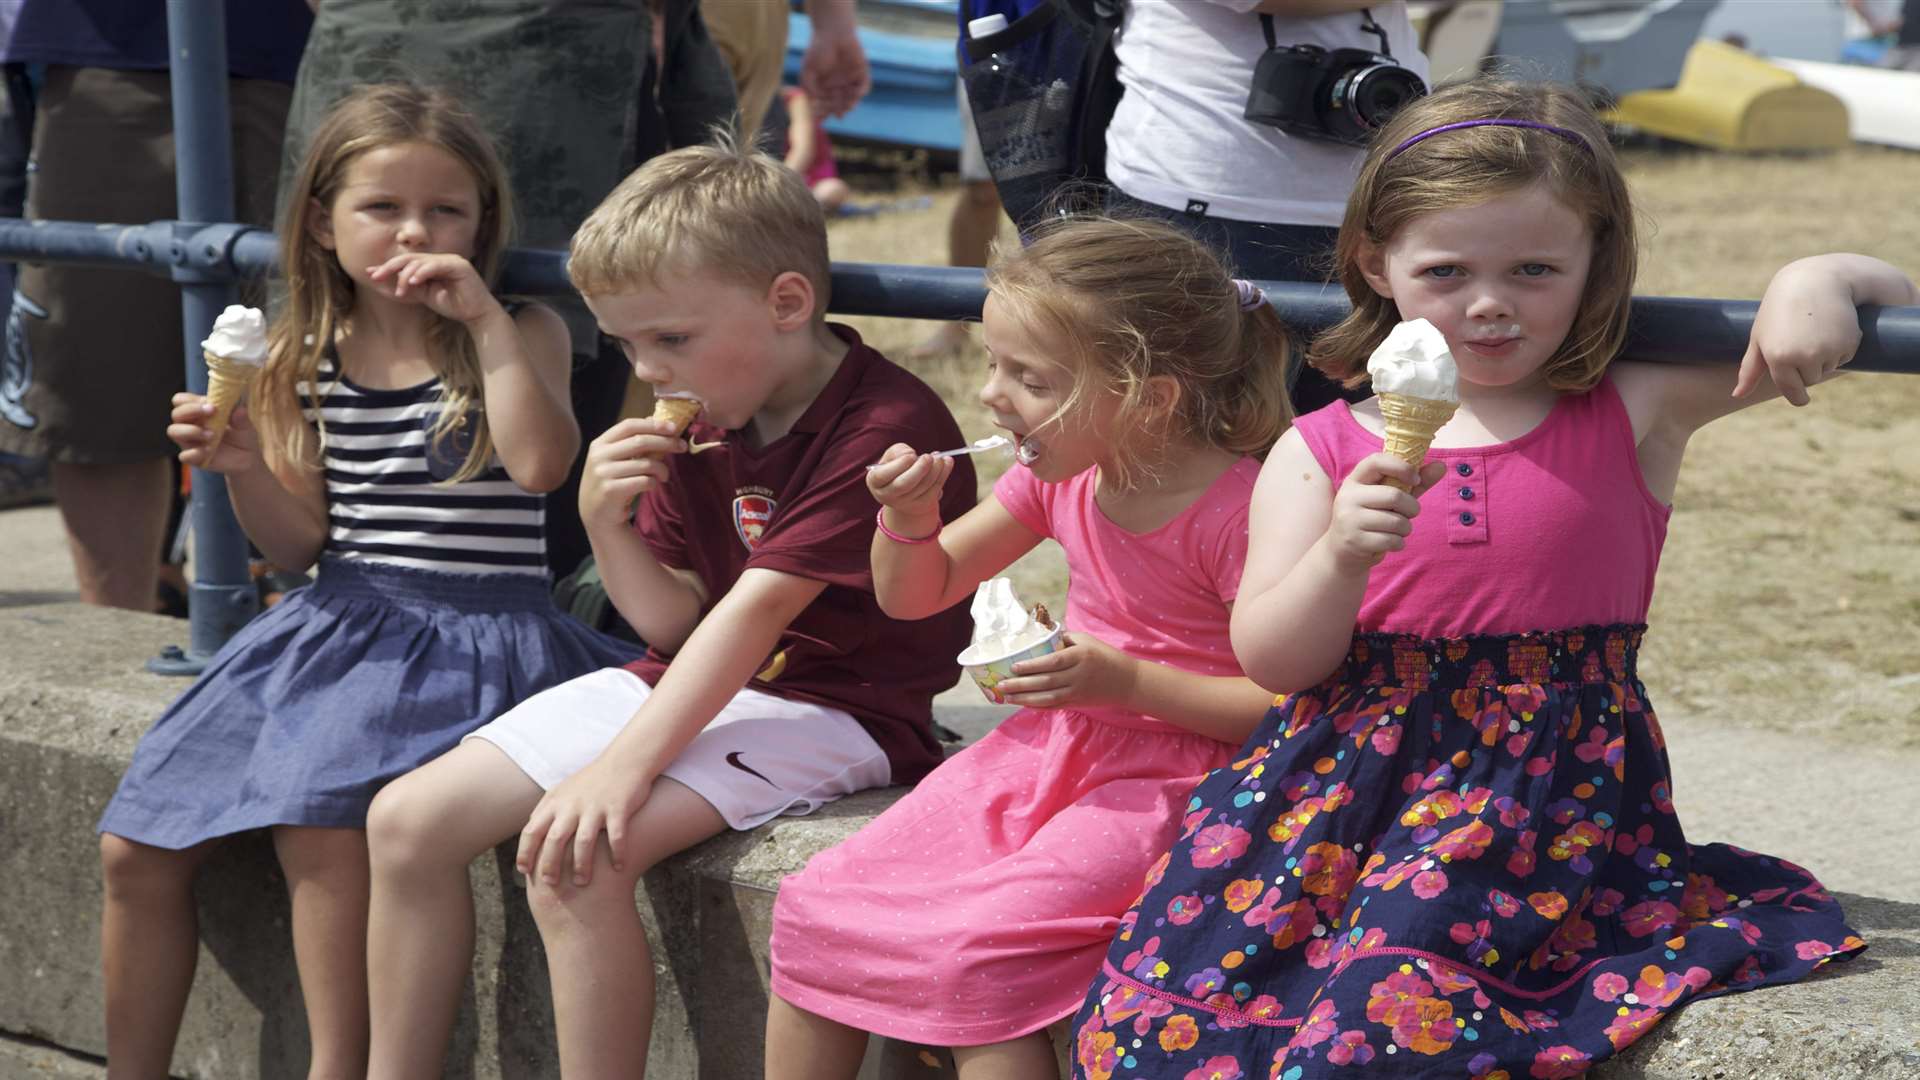 Kids eating ice cream. Picture credit - Christina Burrows